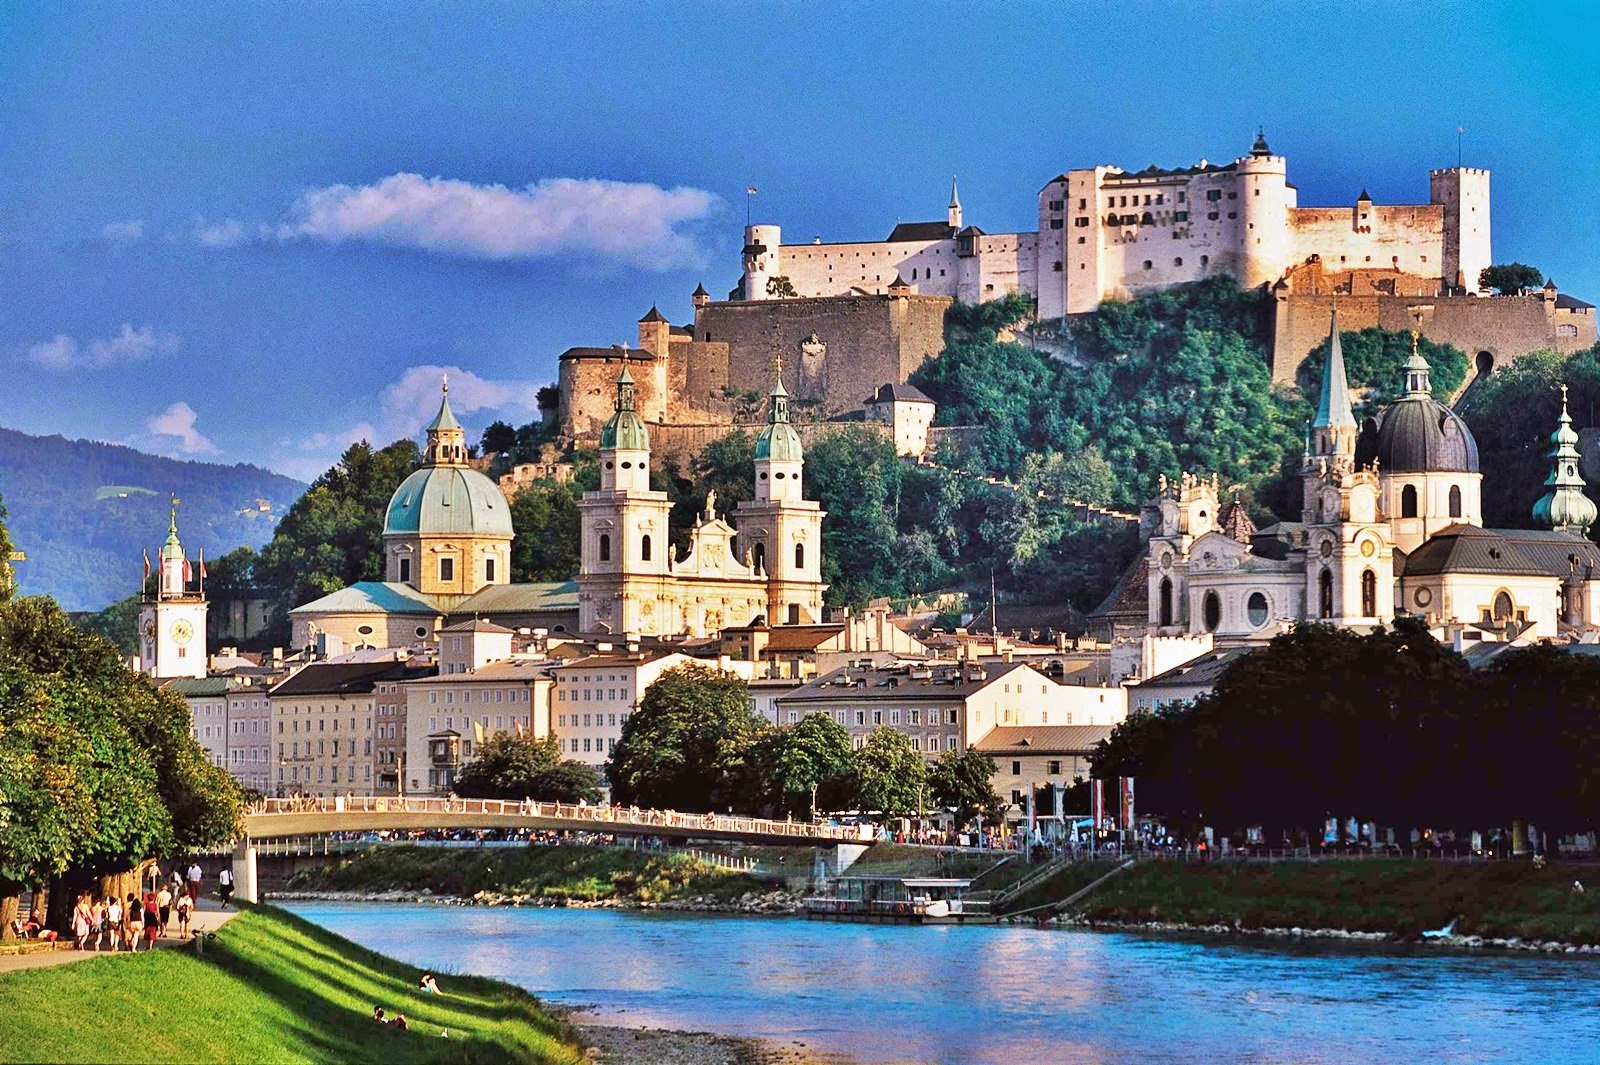 Tourism and Travel: Enjoy touring distinctive Salzburg in the heart of